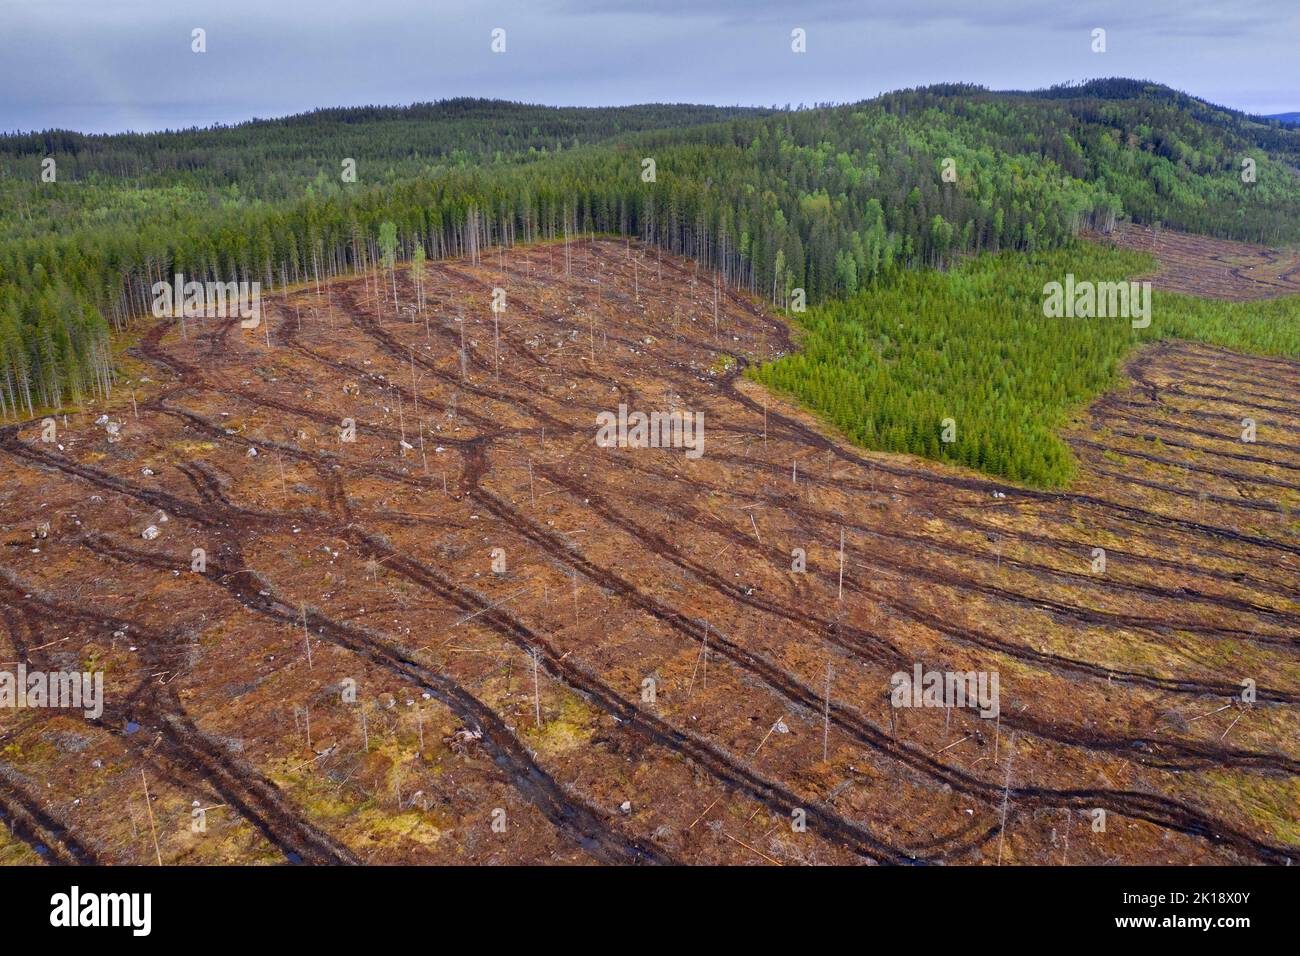 Aerial view over Swedish clearcut area, clearcutting / clearfelling is a forestry / logging practice in which all trees are cut down, Dalarna, Sweden Stock Photo